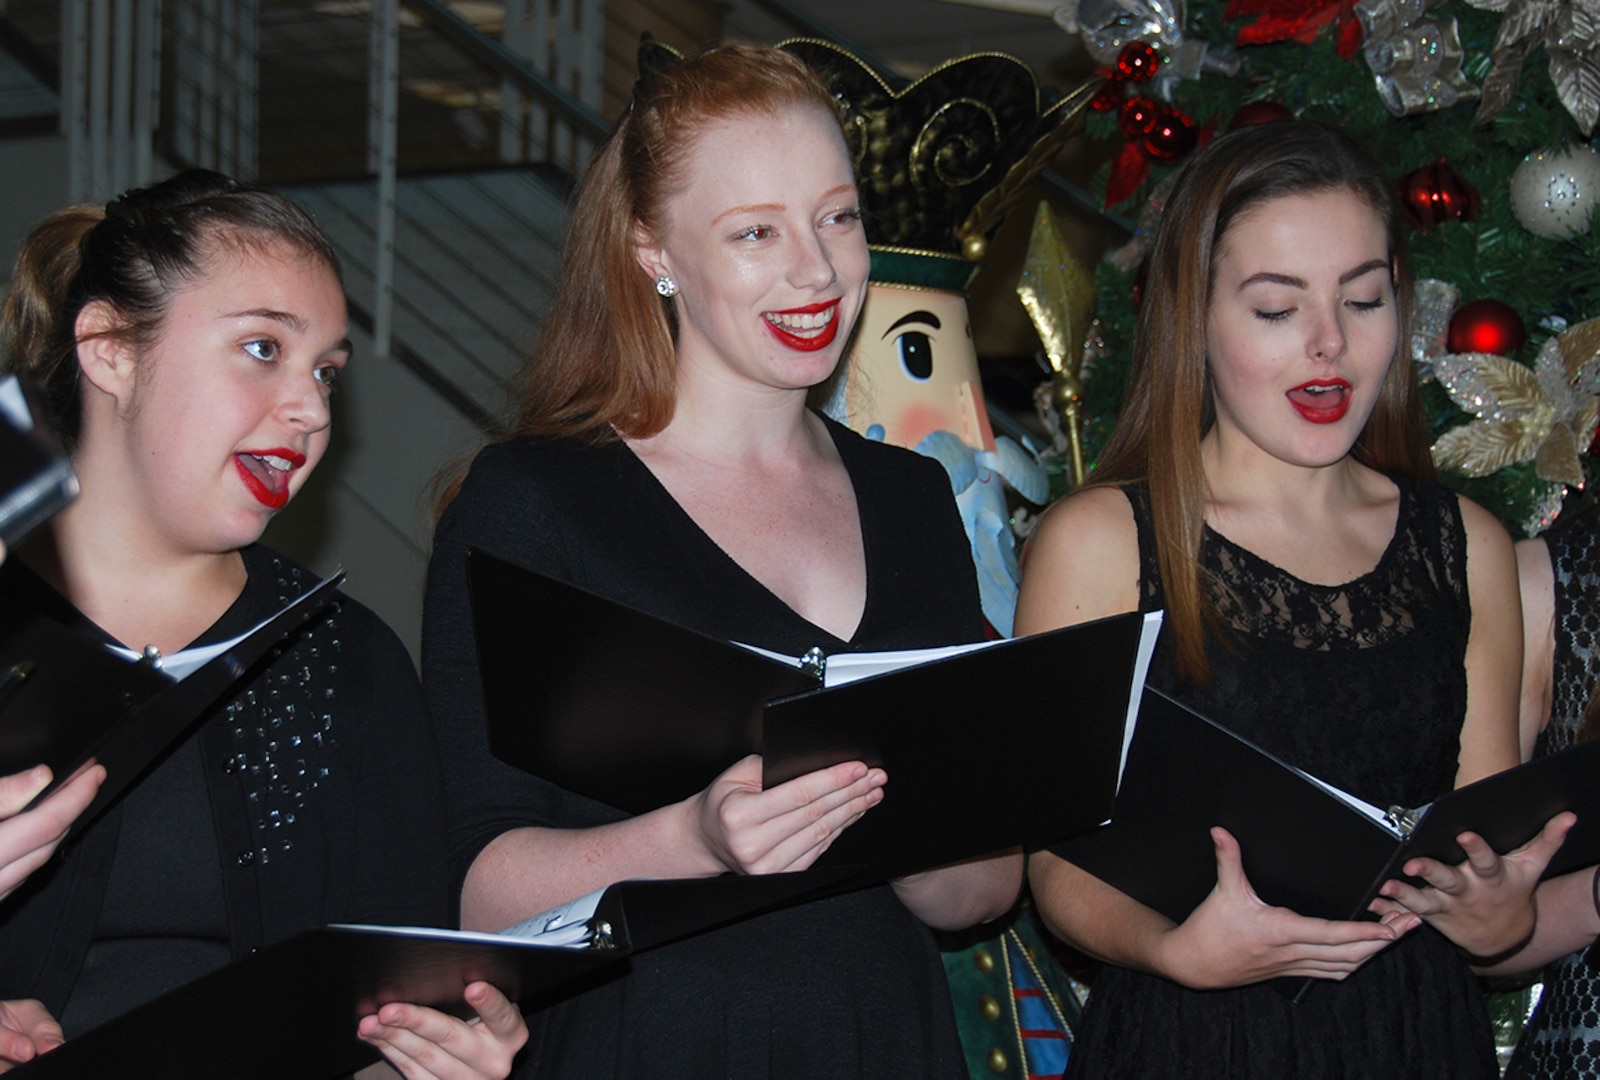 Hannah Weilminster, Cayli Dobbs and Shannon O’Shaughnessy from the Metropolitan School of the Arts Academy sing “Gloria in Excelsis Deo” during the annual McNamara Headquarters Complex tree lighting ceremony Dec. 7.